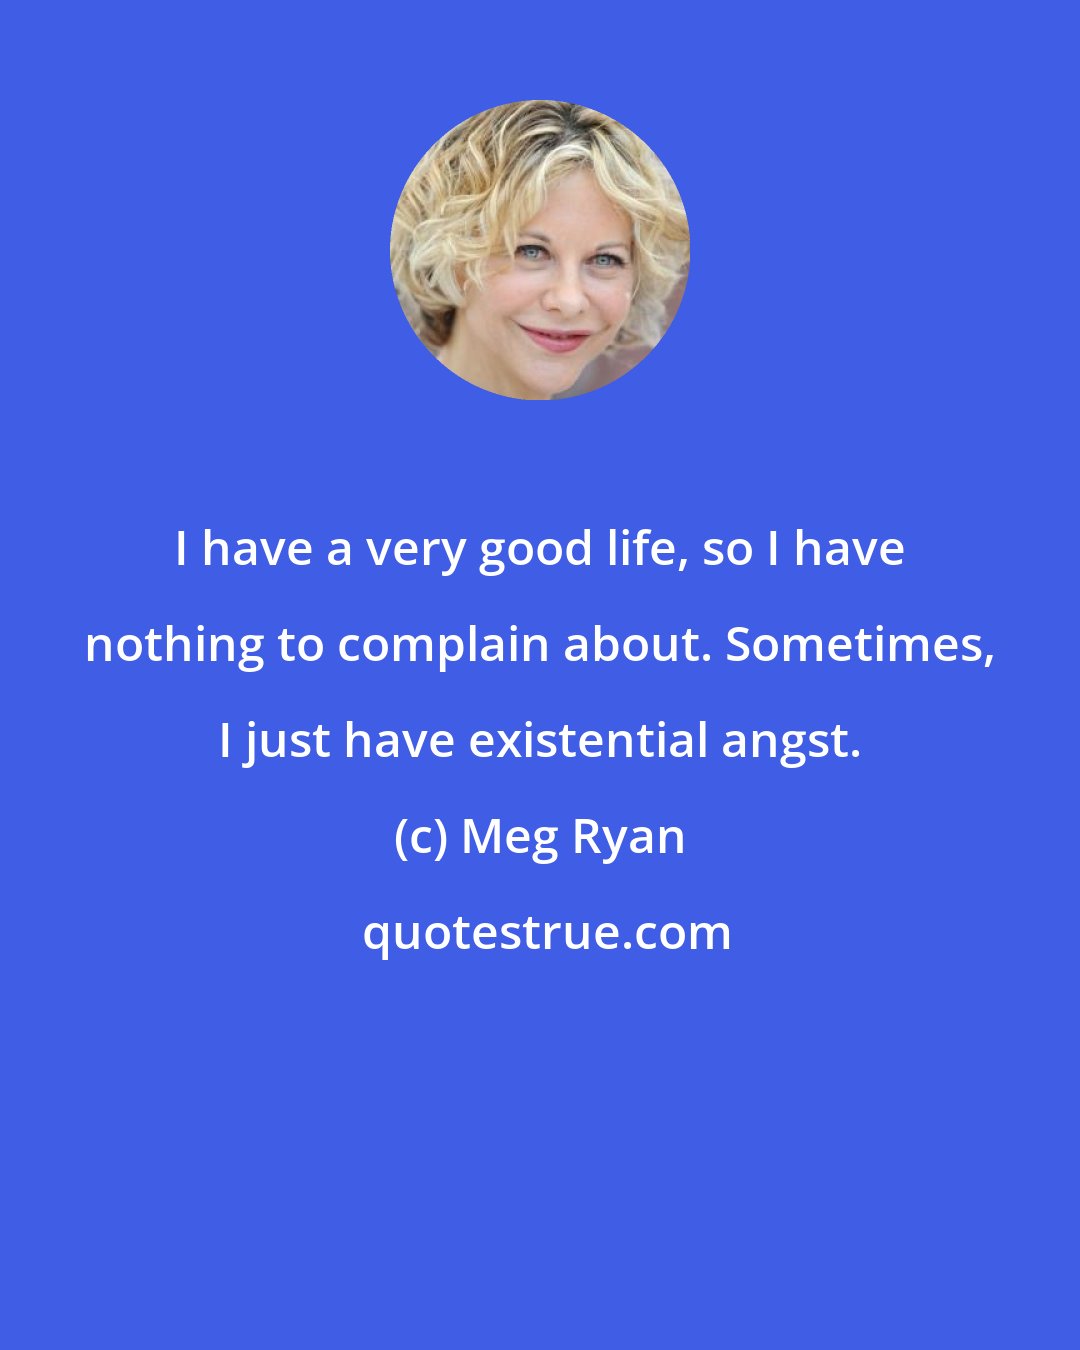 Meg Ryan: I have a very good life, so I have nothing to complain about. Sometimes, I just have existential angst.